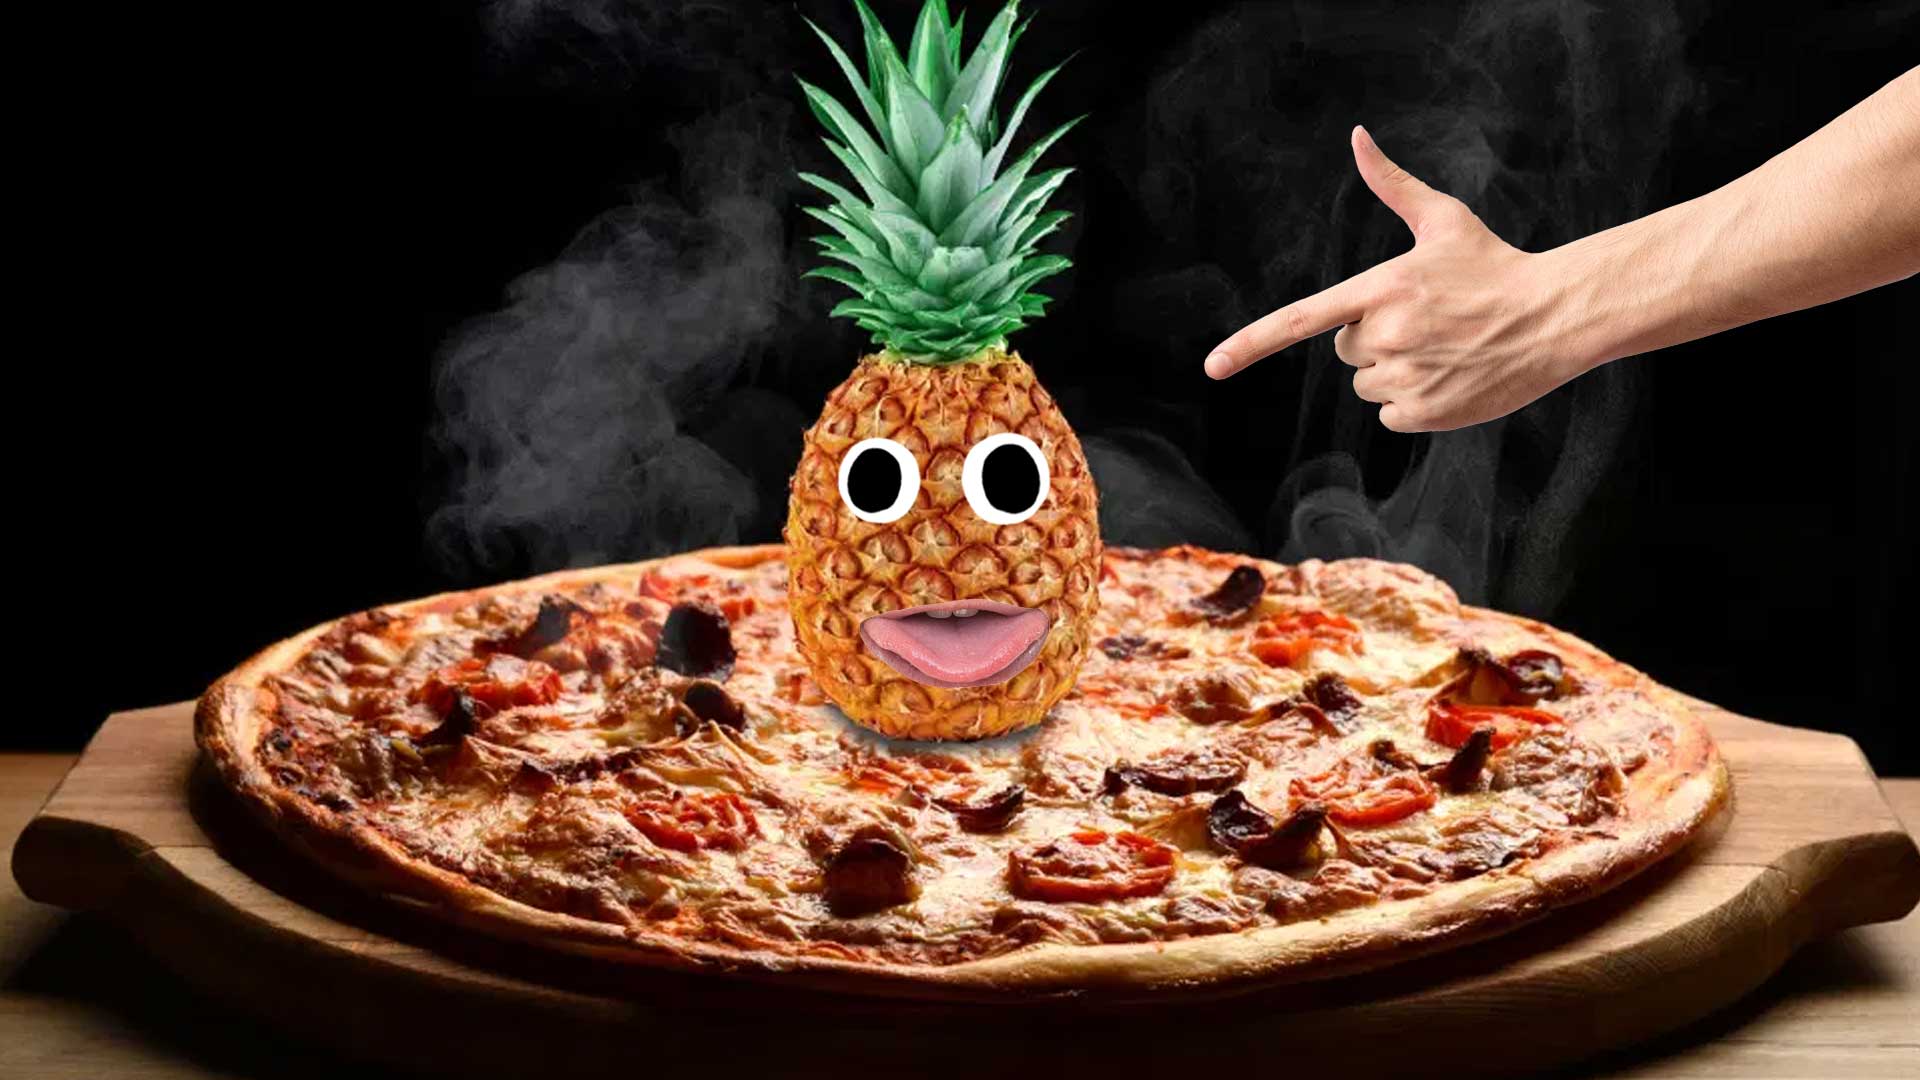 Pineapple on a pizza